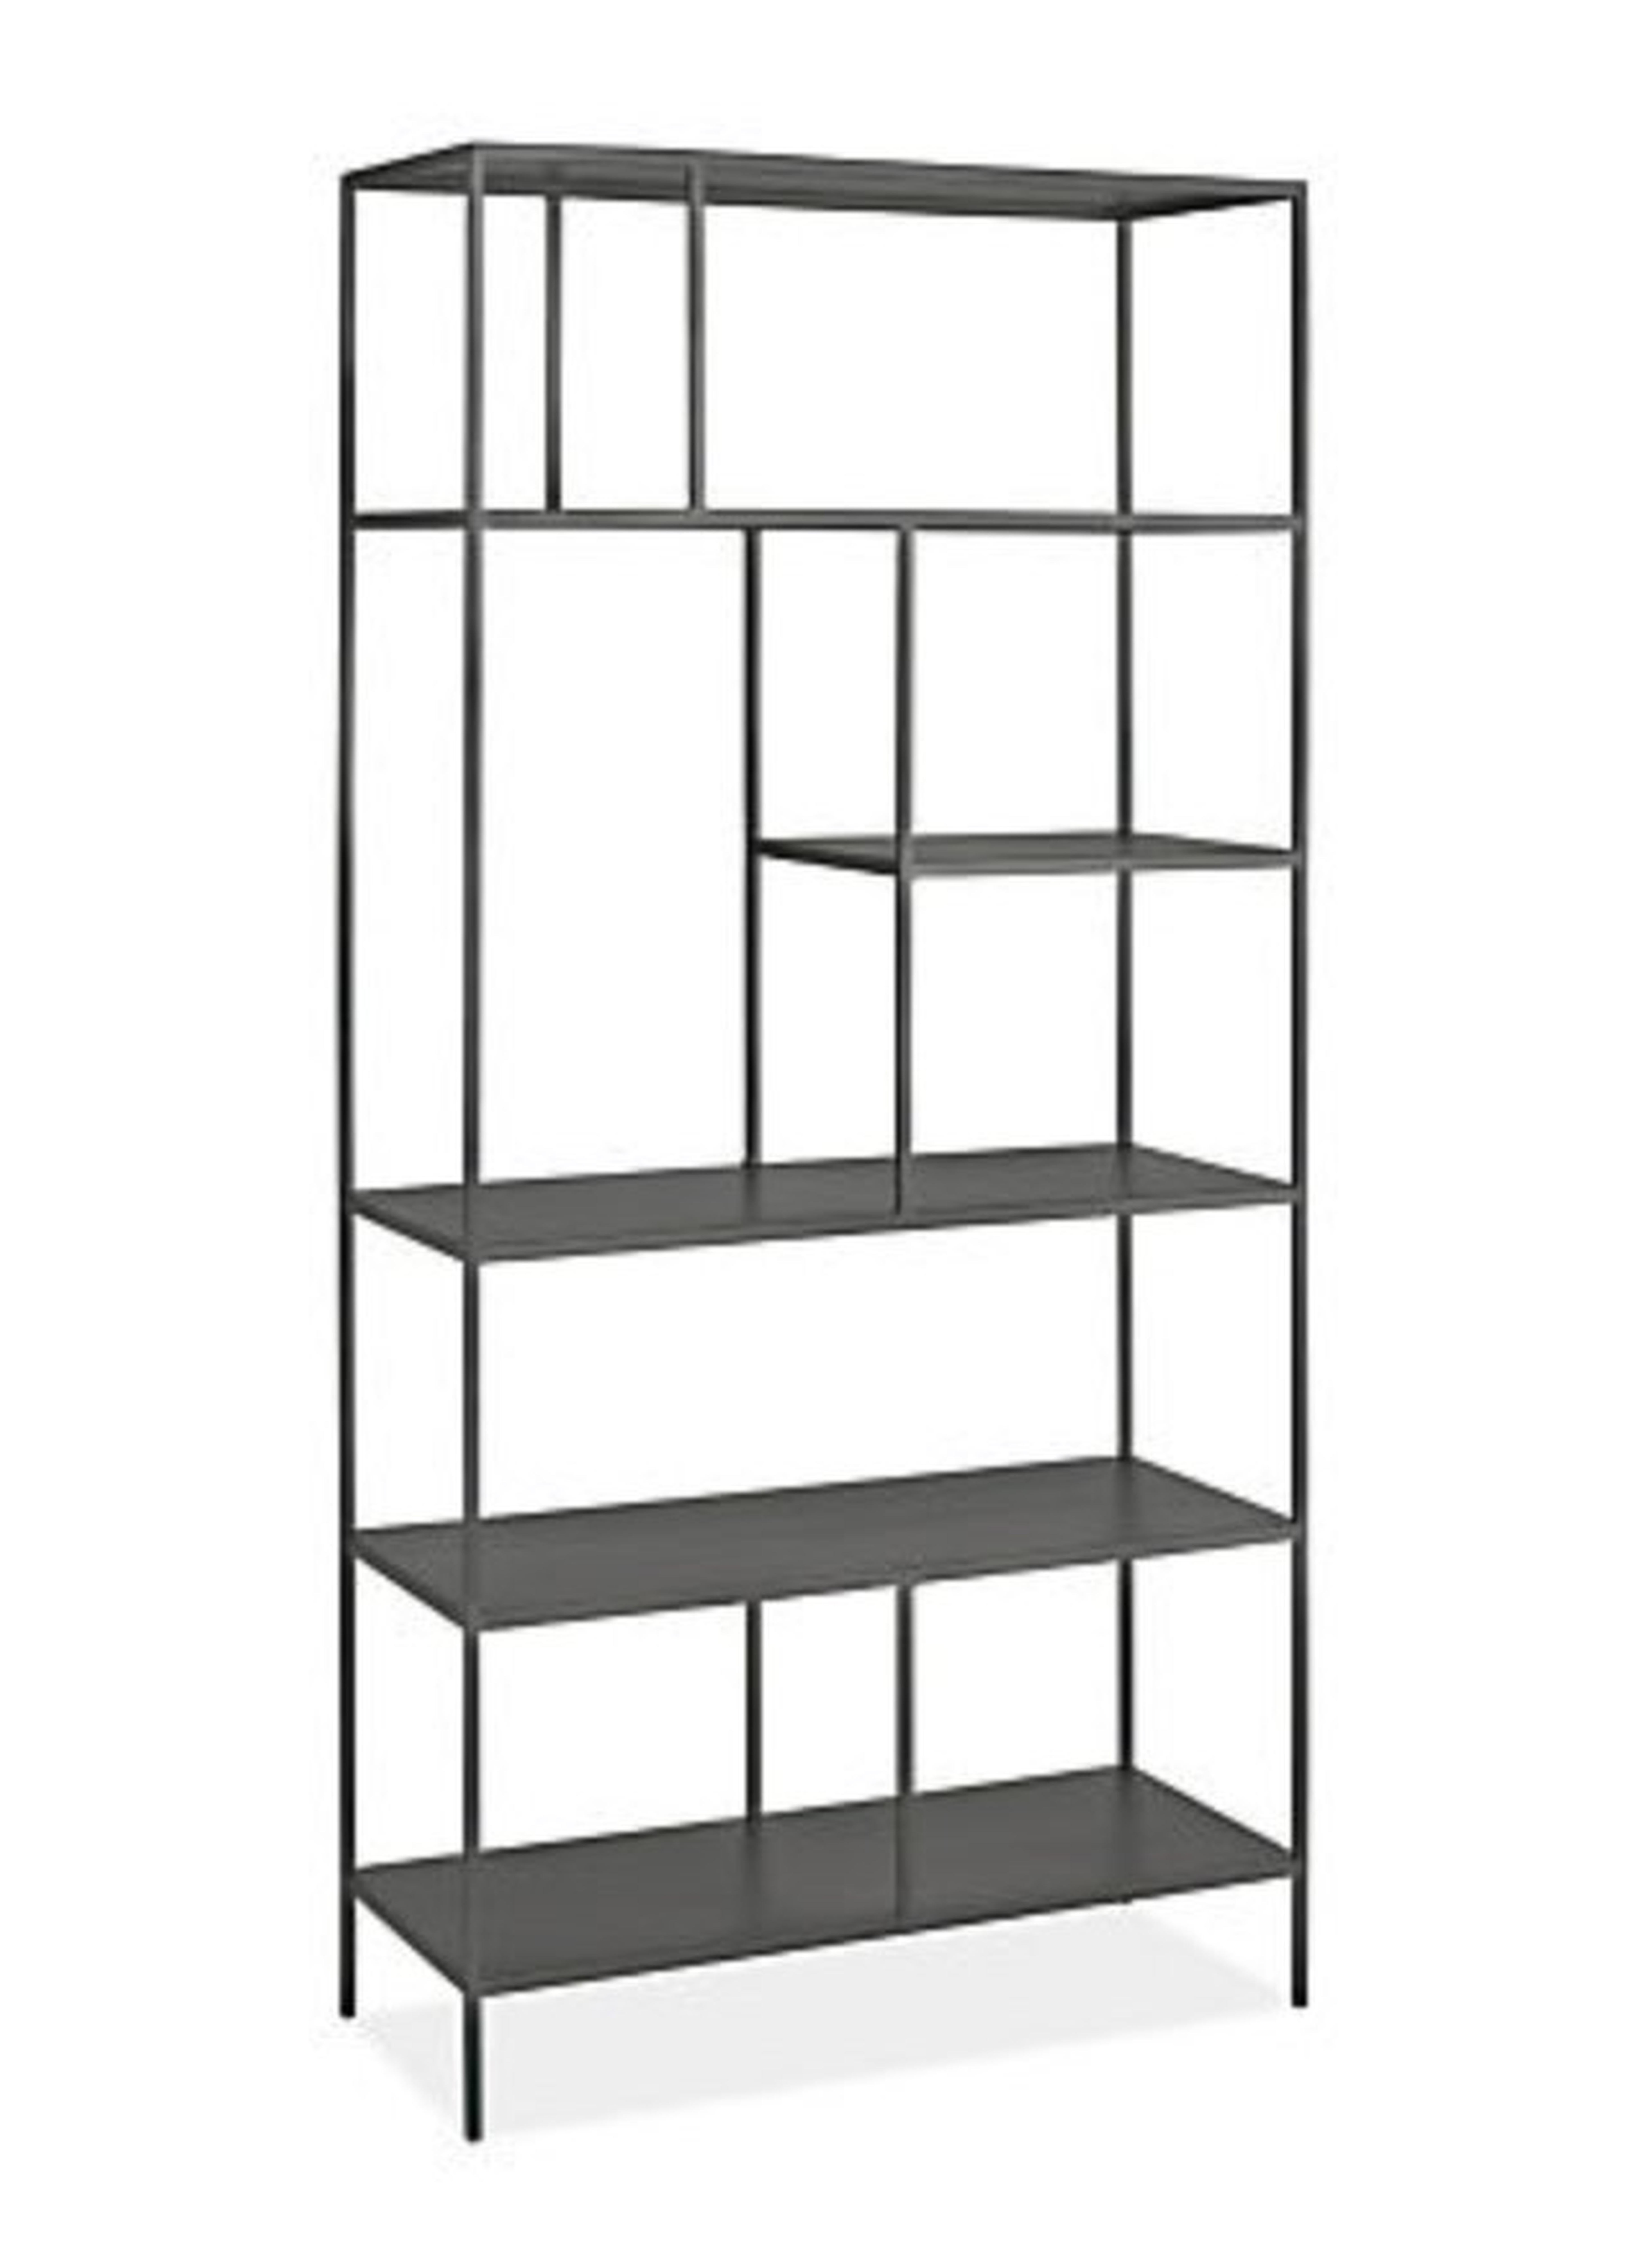 Foshay Bookcases in Natural Steel - Room & Board